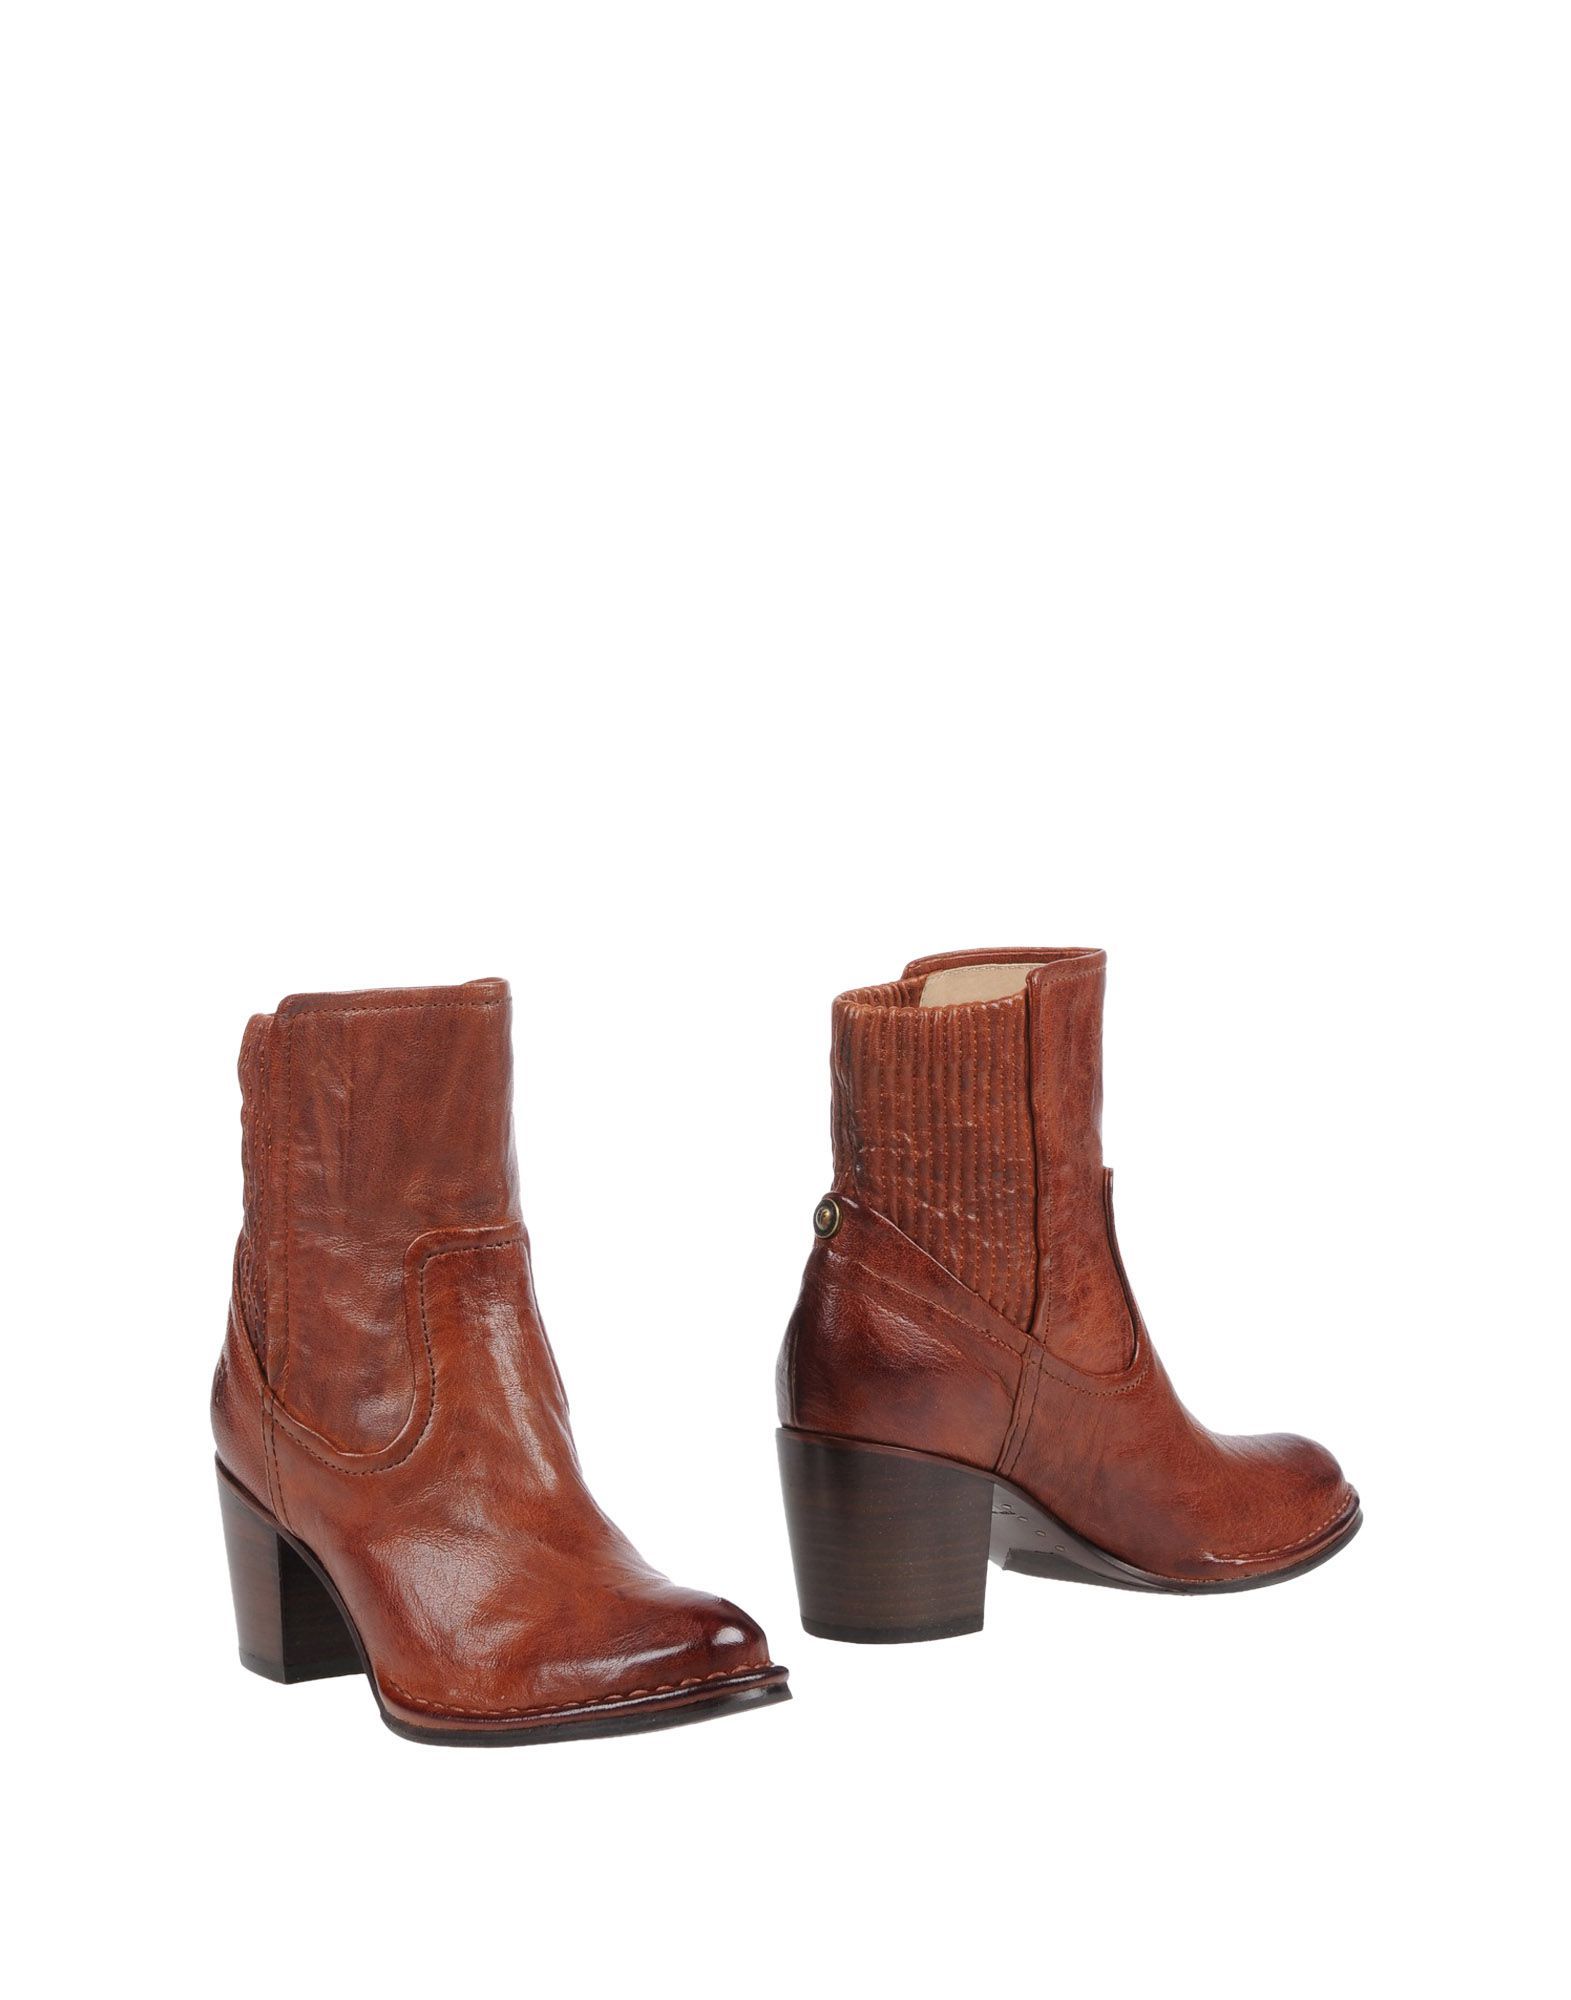 FRYE Ankle boots | YOOX (US)